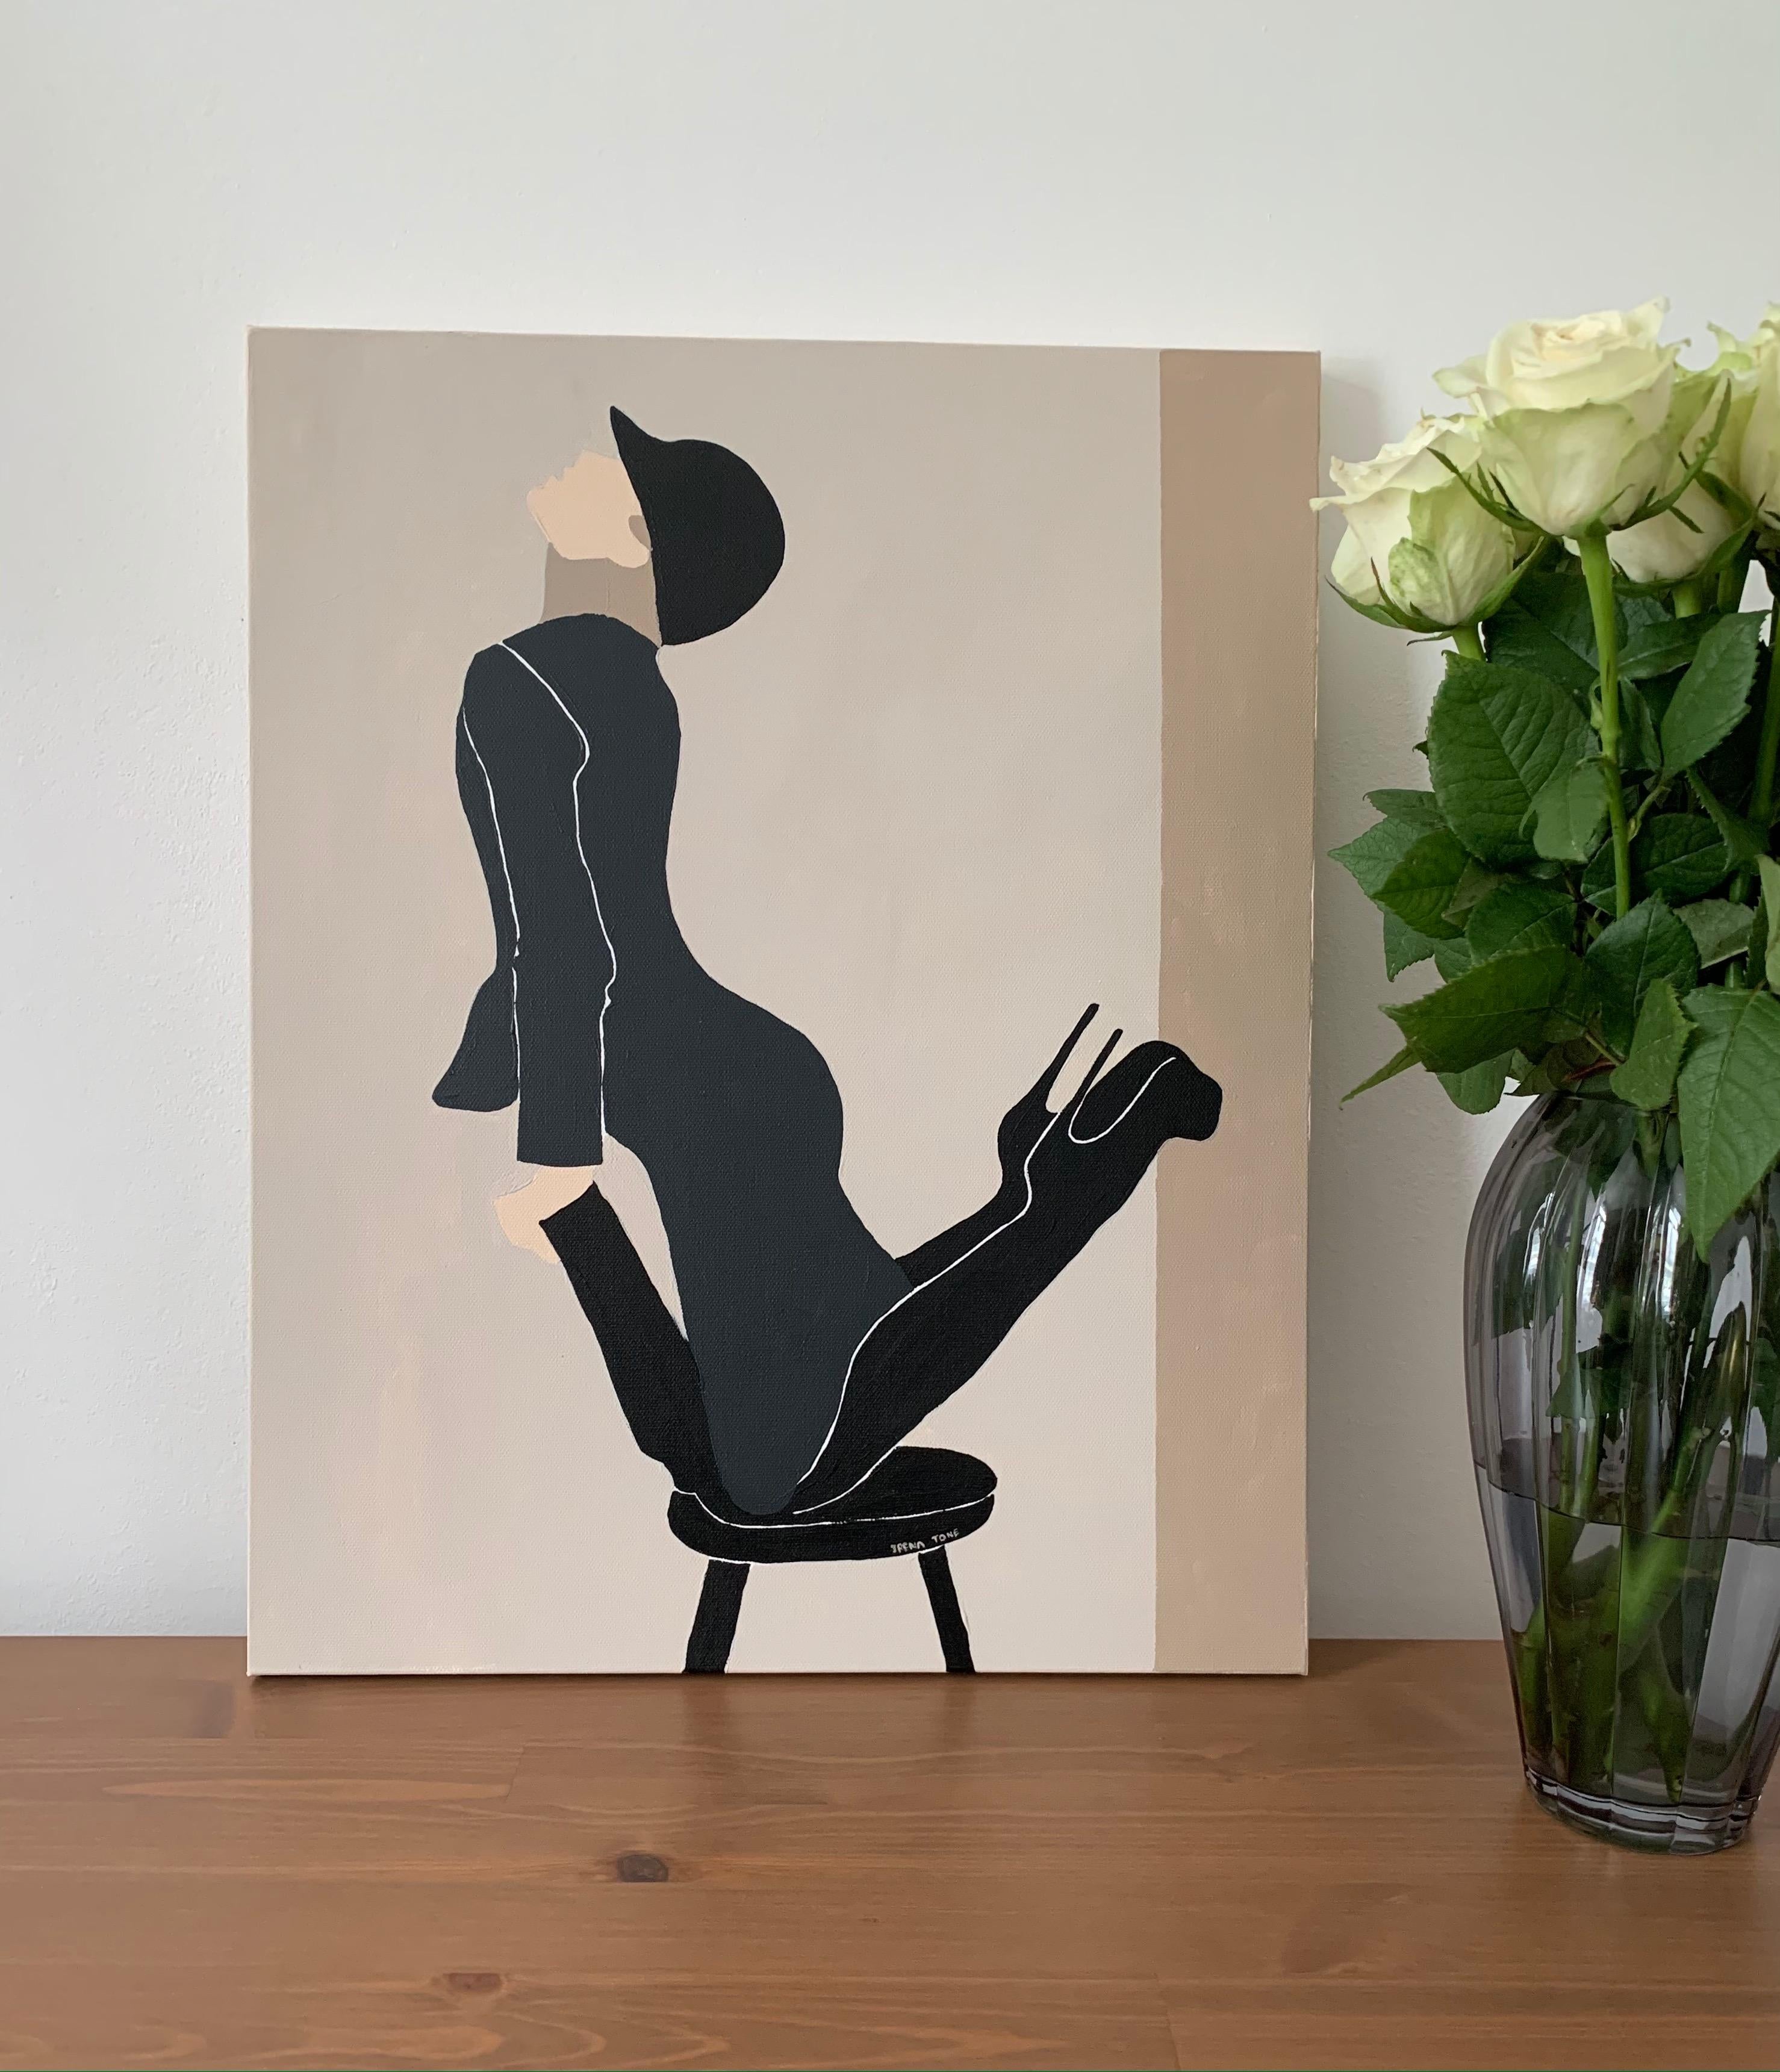 Beige: stool, abstract minimalist woman portrait in beige and black colors - Painting by Irena Tone